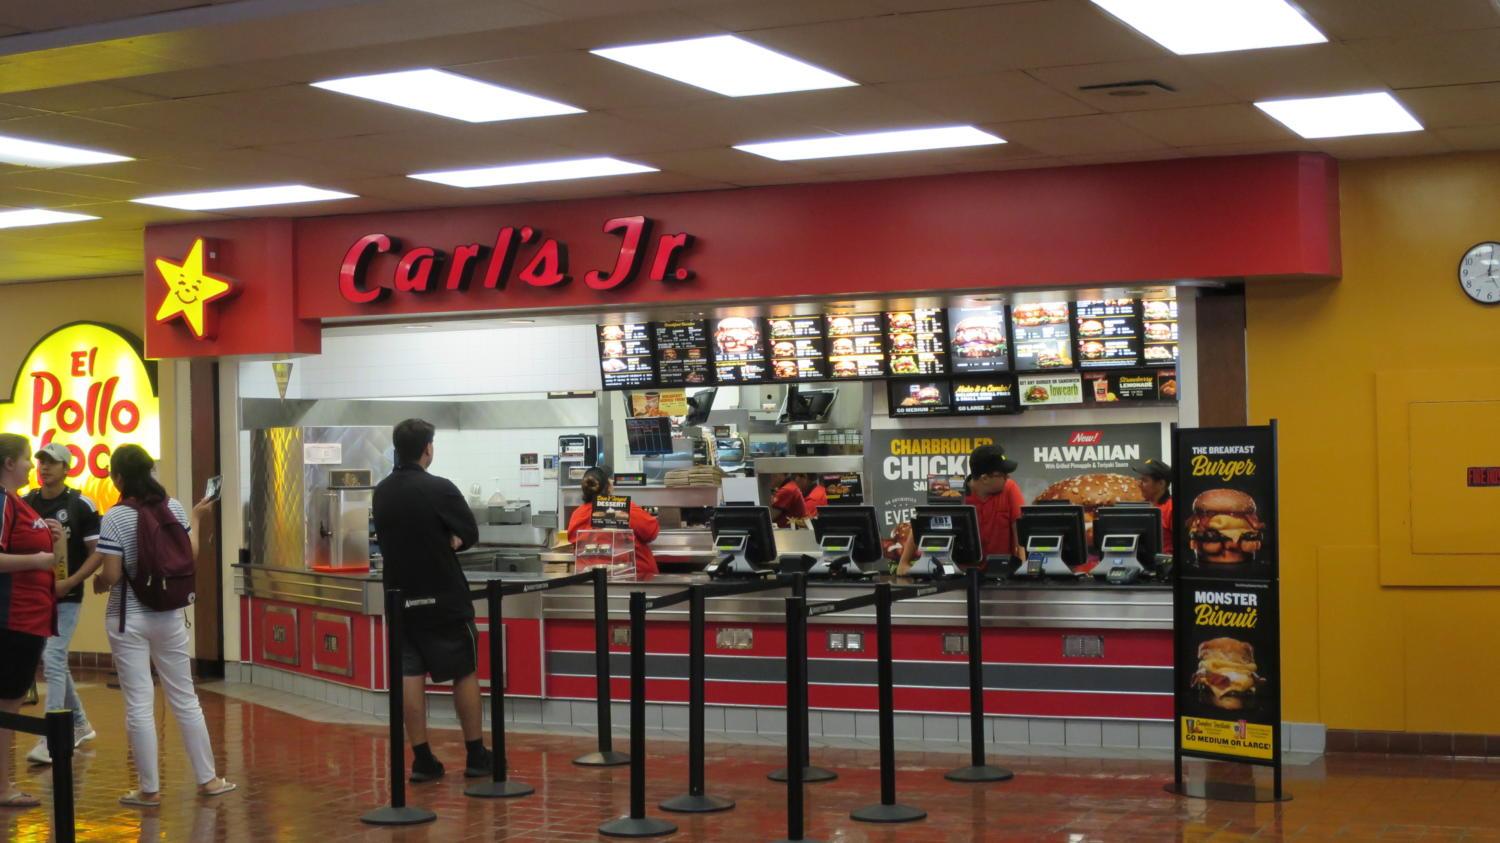 The Carl’s Jr. in the University Student Union dining hall serves customers for lunch.